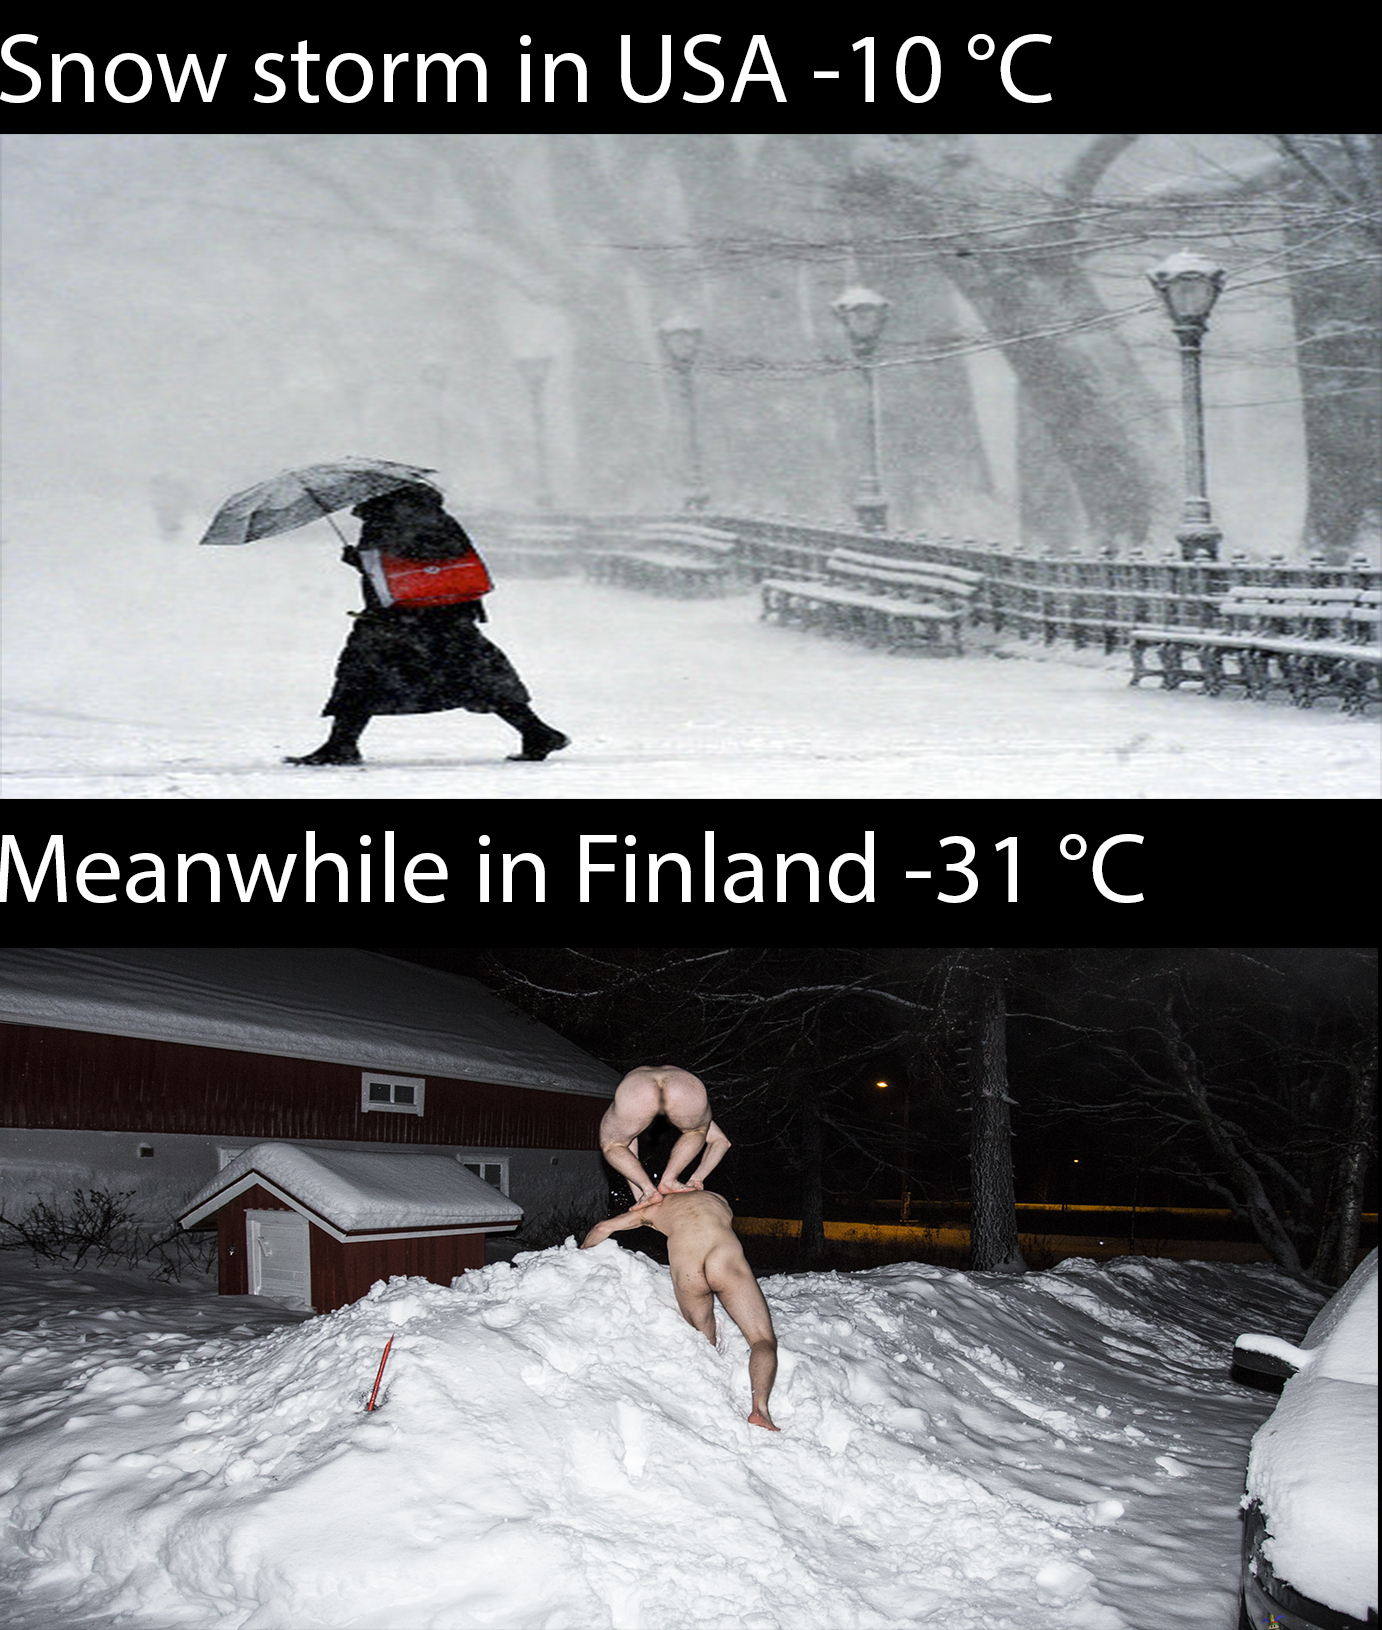 Meanwhile in Finland 